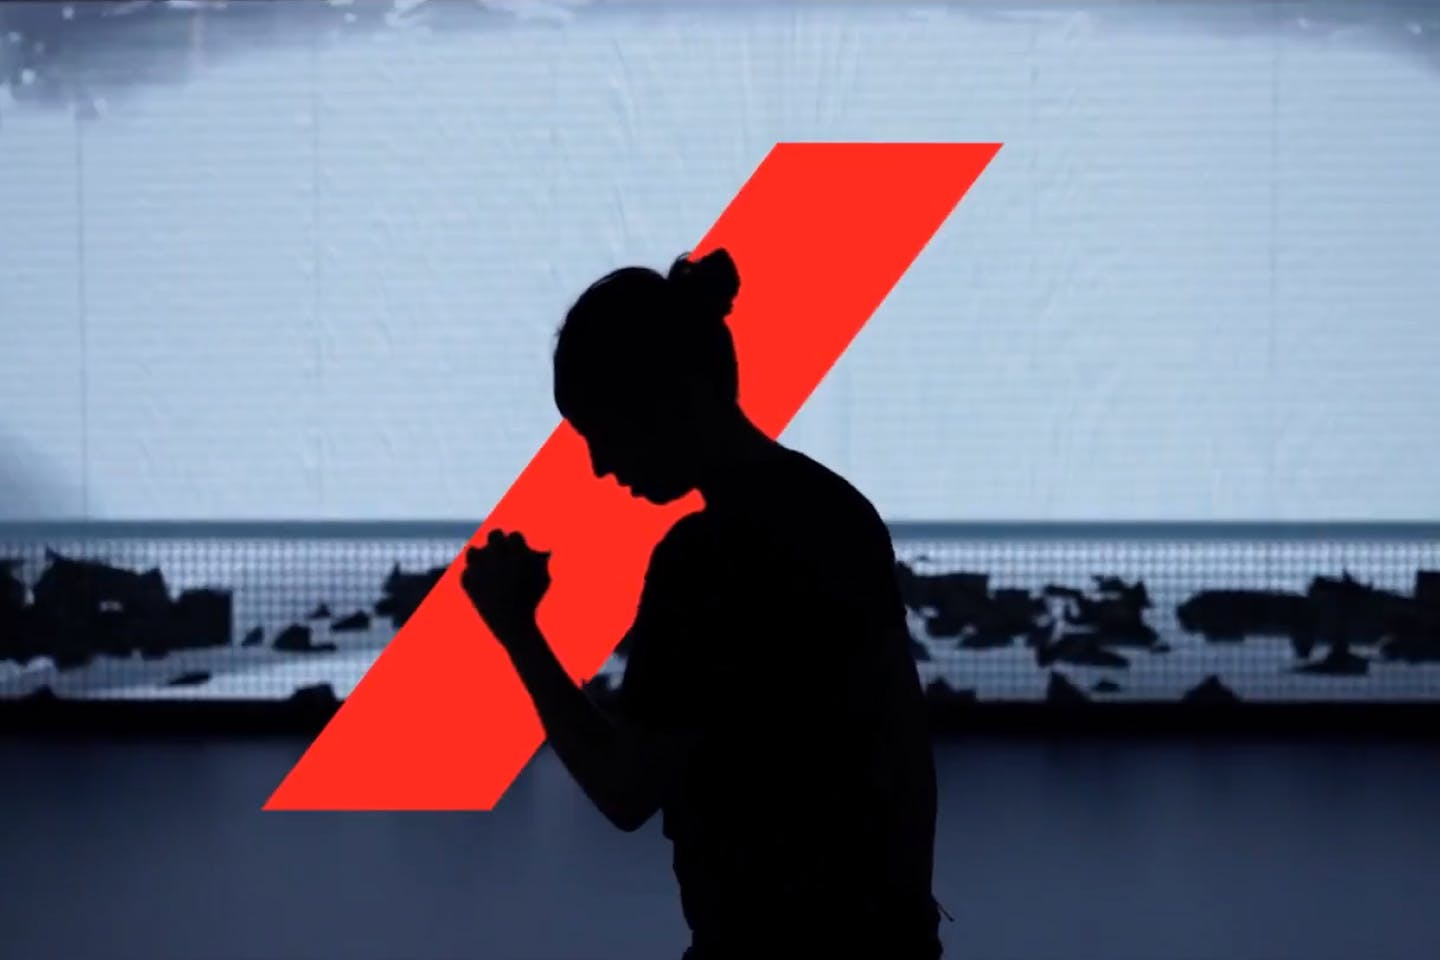 Silhouette of a women in front of the Axa red bar